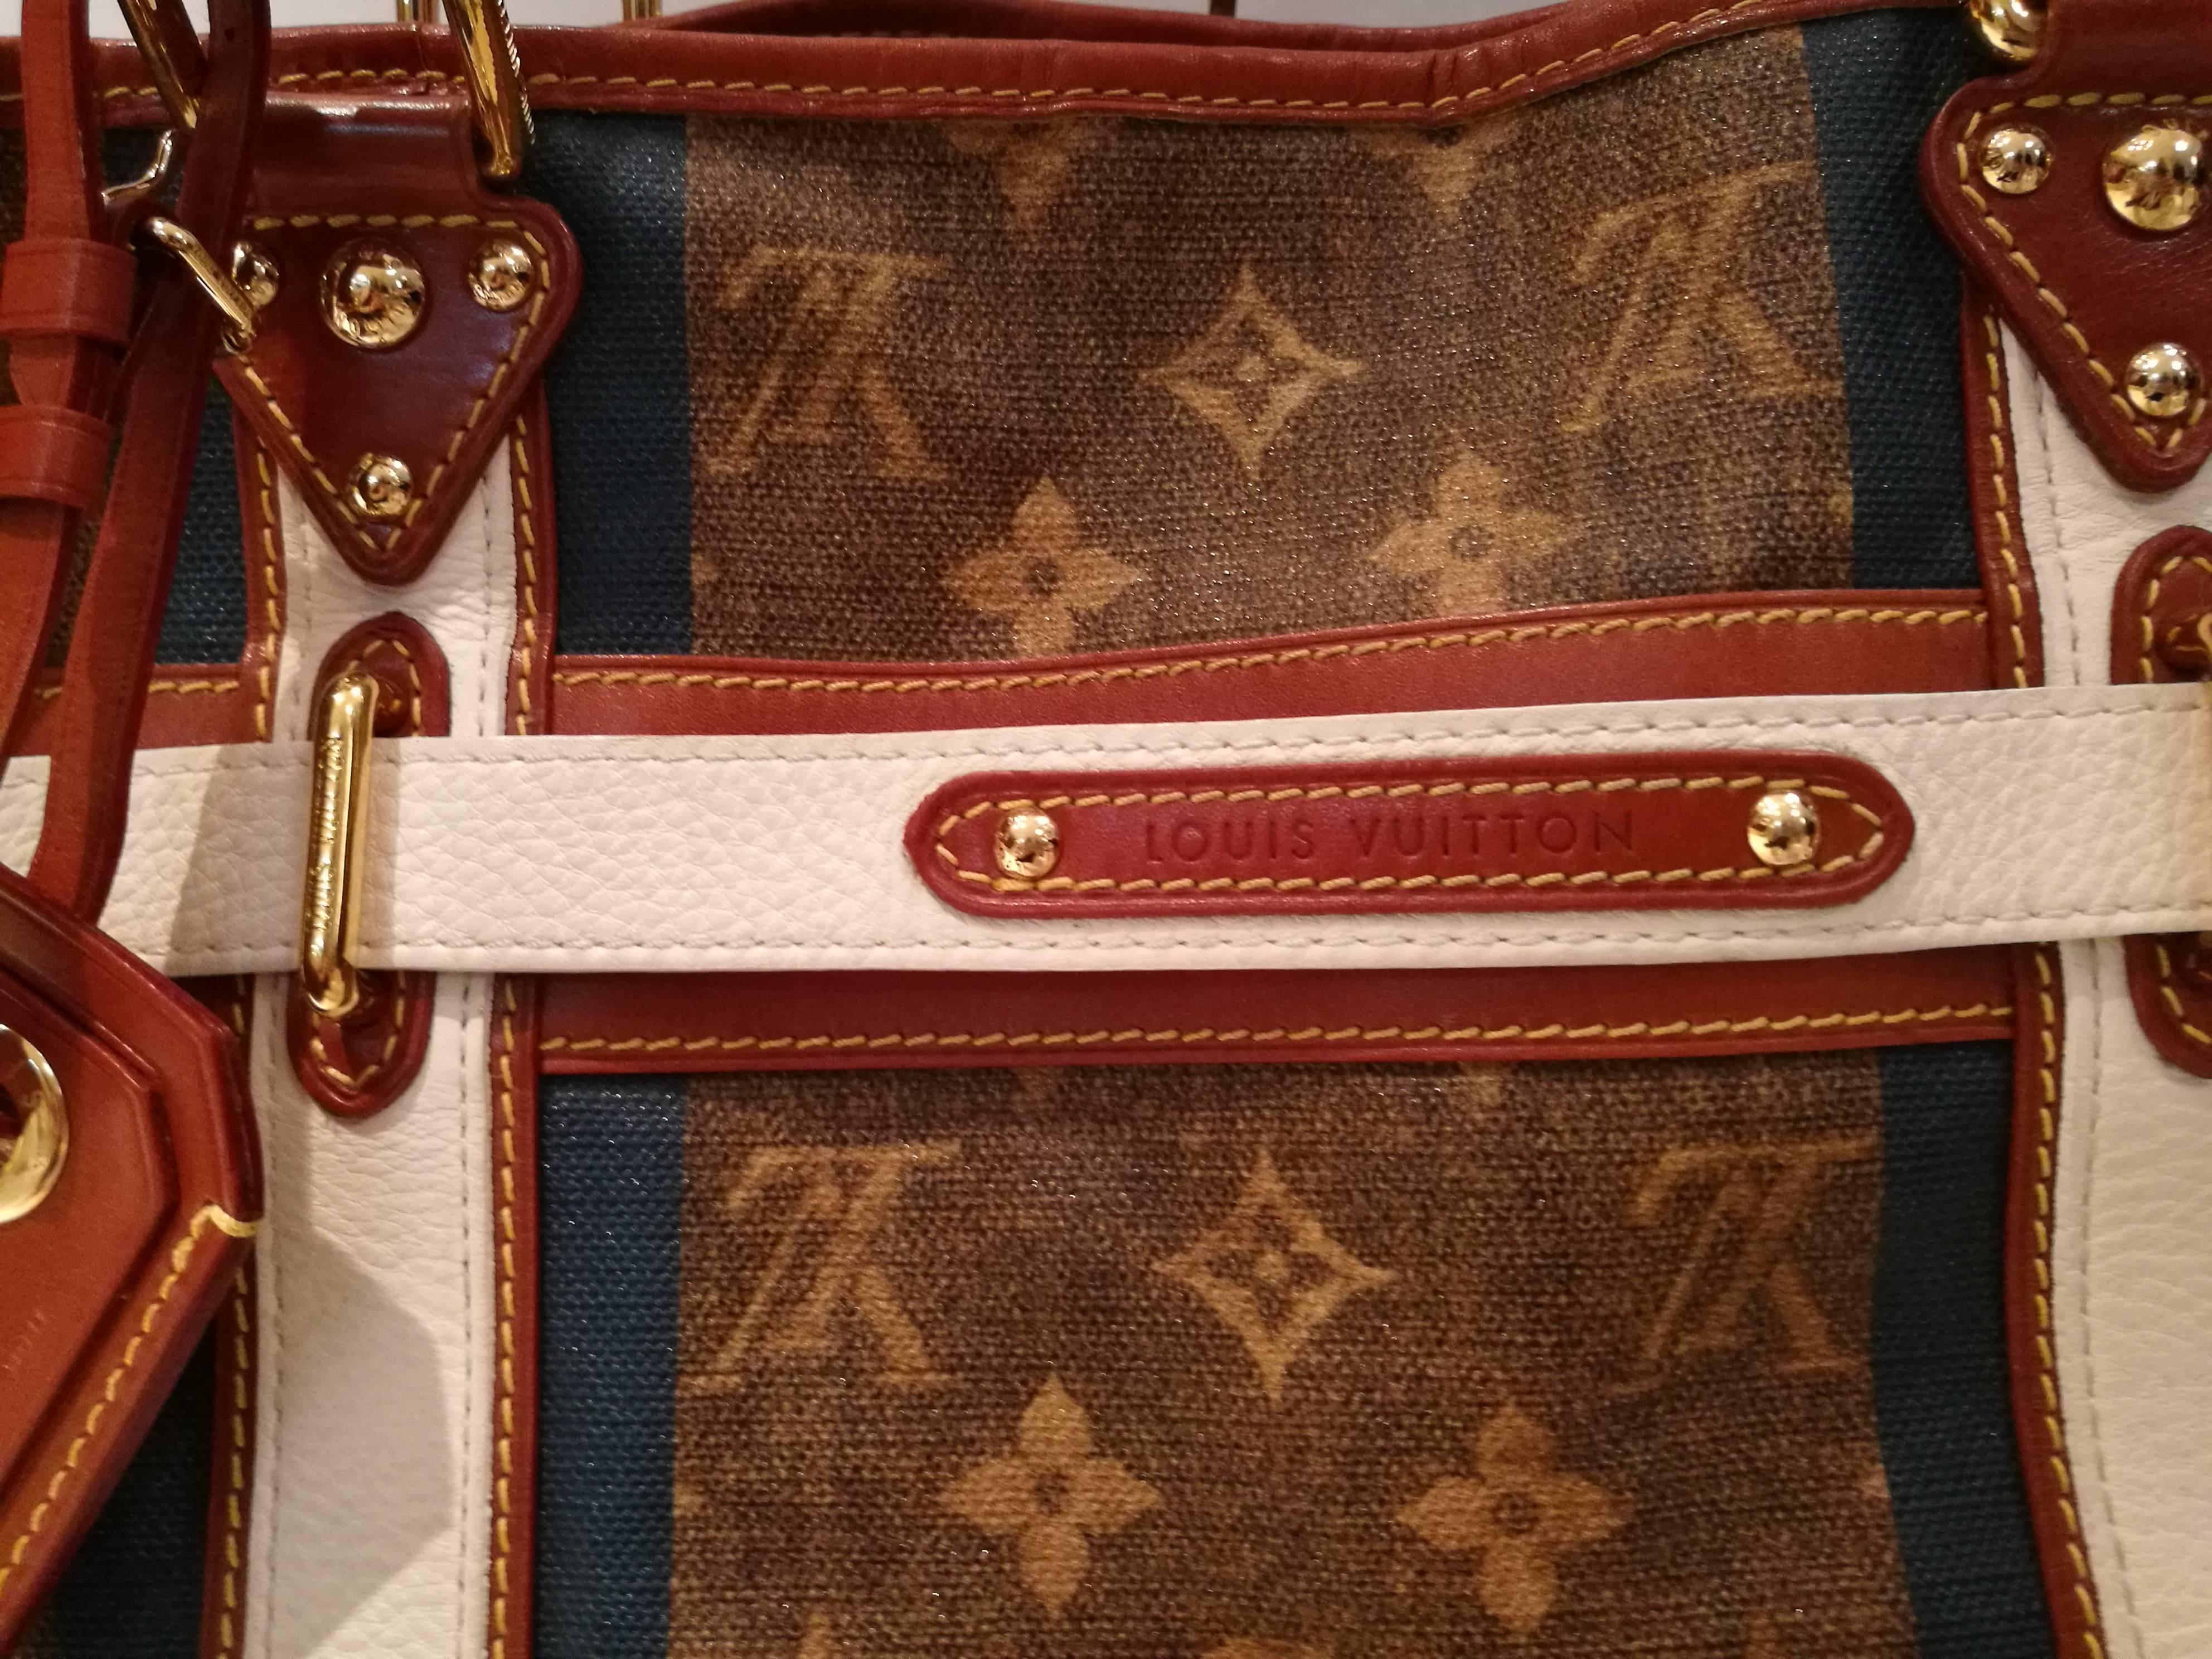 This is an authentic LOUIS VUITTON Monogram Tisse Sac Rayures GM Blue. The unique style and sophisticated features of this Louis Vuitton shoulder bag have a chic look of elegance for everyday. 
The bag is the largest size of the Sac Rayures and